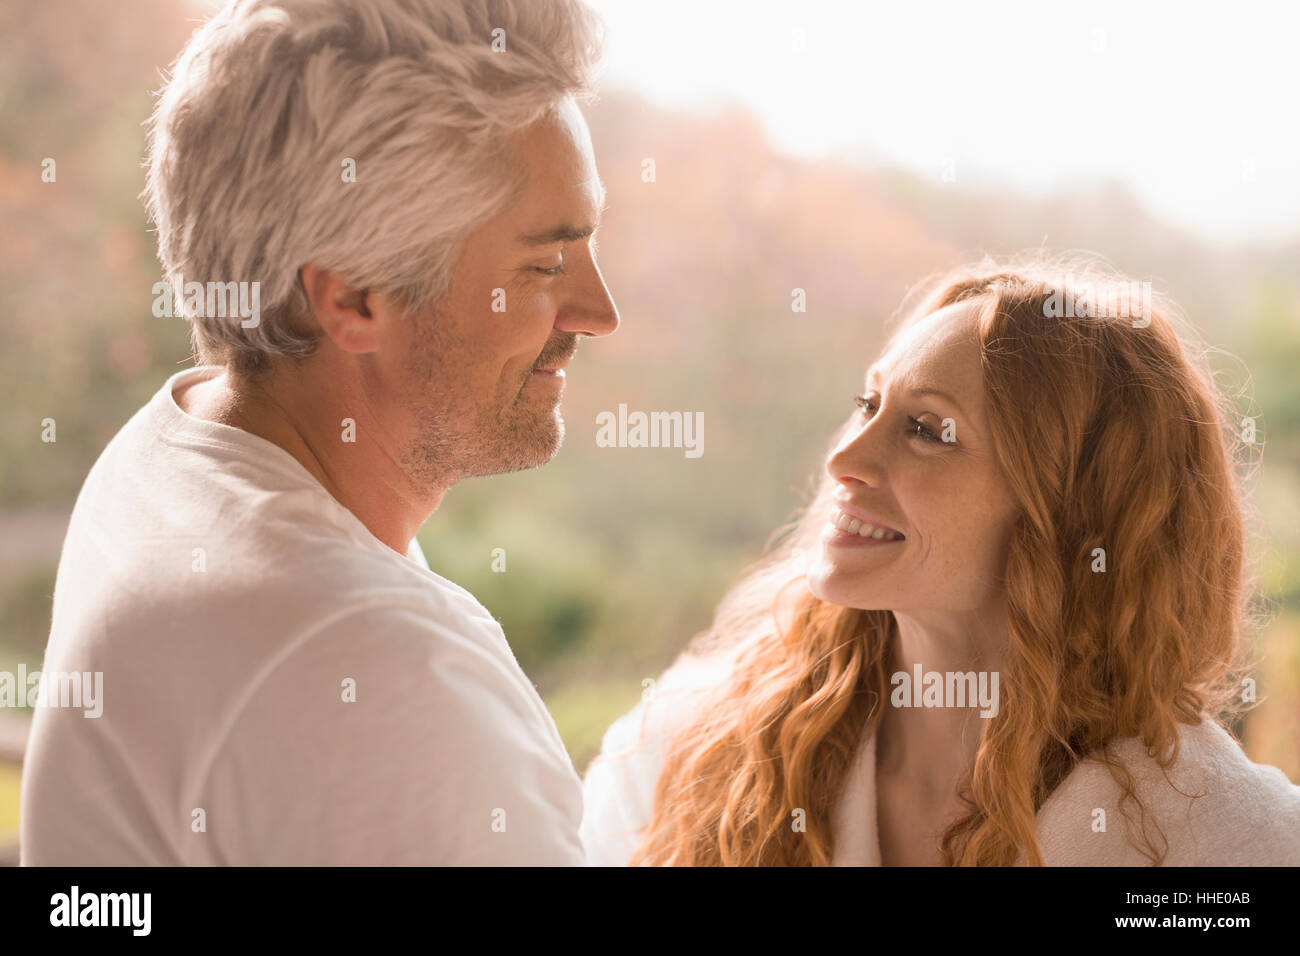 Smiling couple face to face Stock Photo